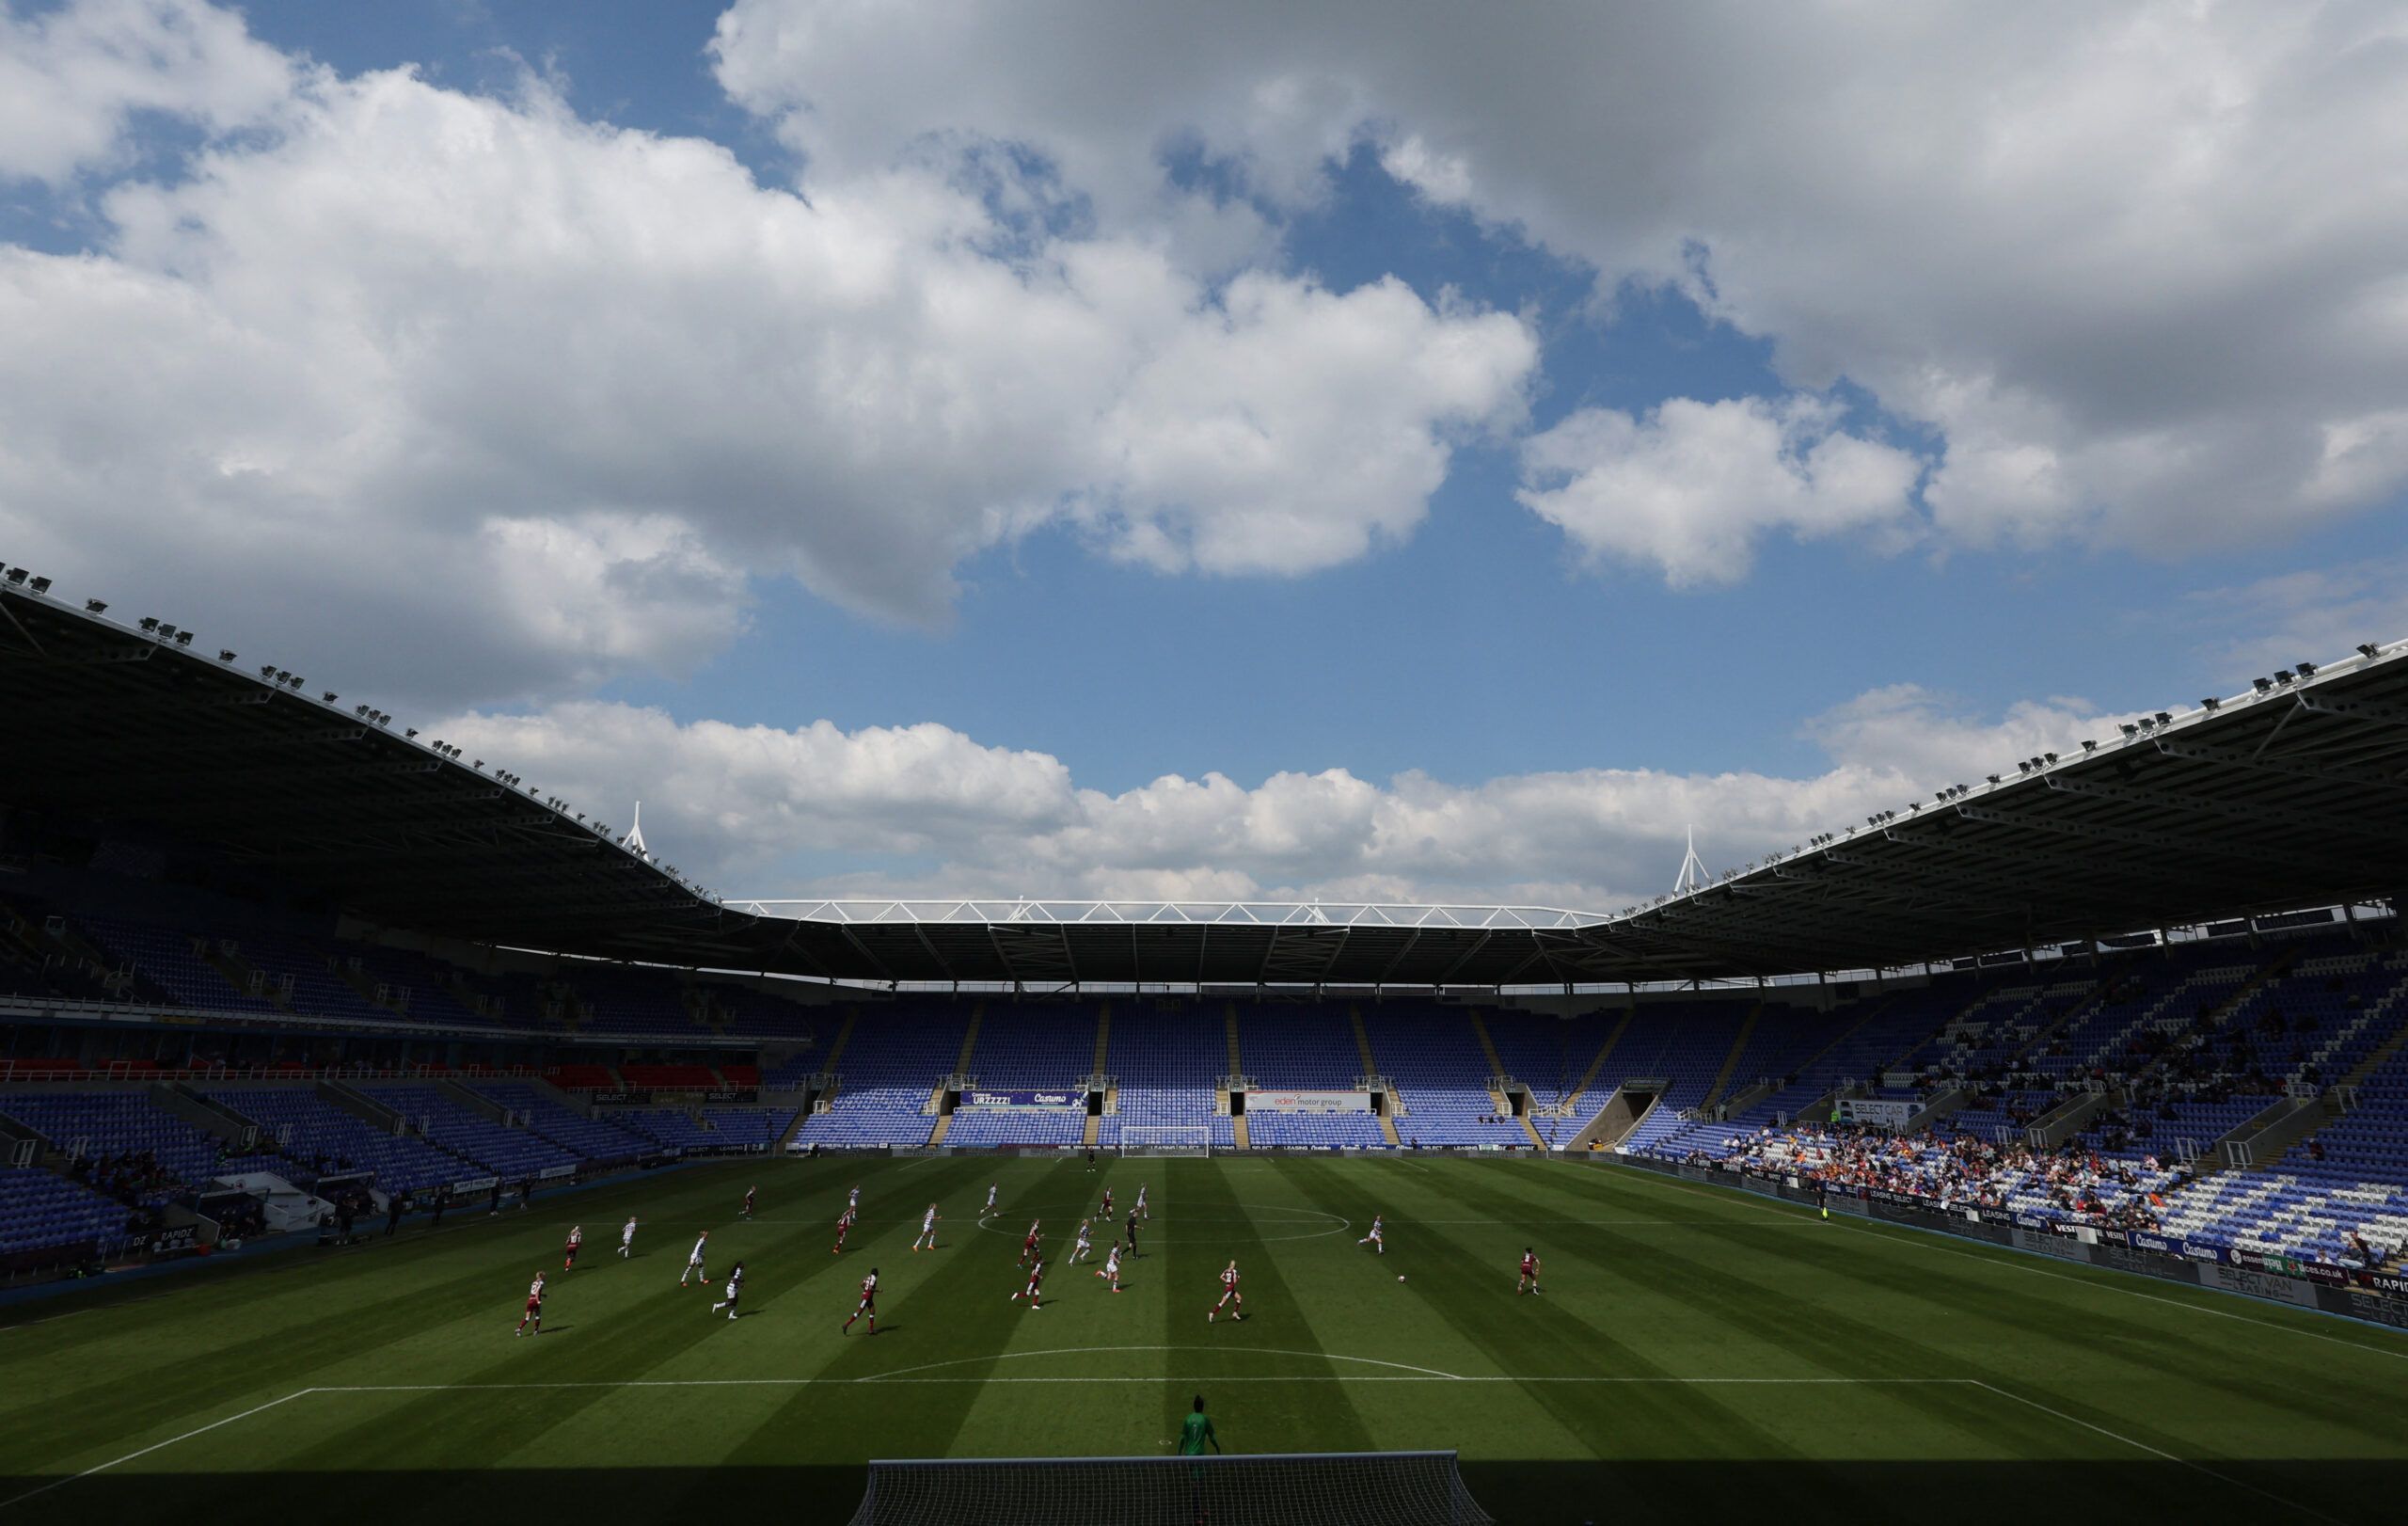 Soccer Football - Women's Super League - Reading v West Ham United - Madejski Stadium, Reading, Britain - April 24, 2022 General view inside the stadium during the match Action Images via Reuters/Paul Childs